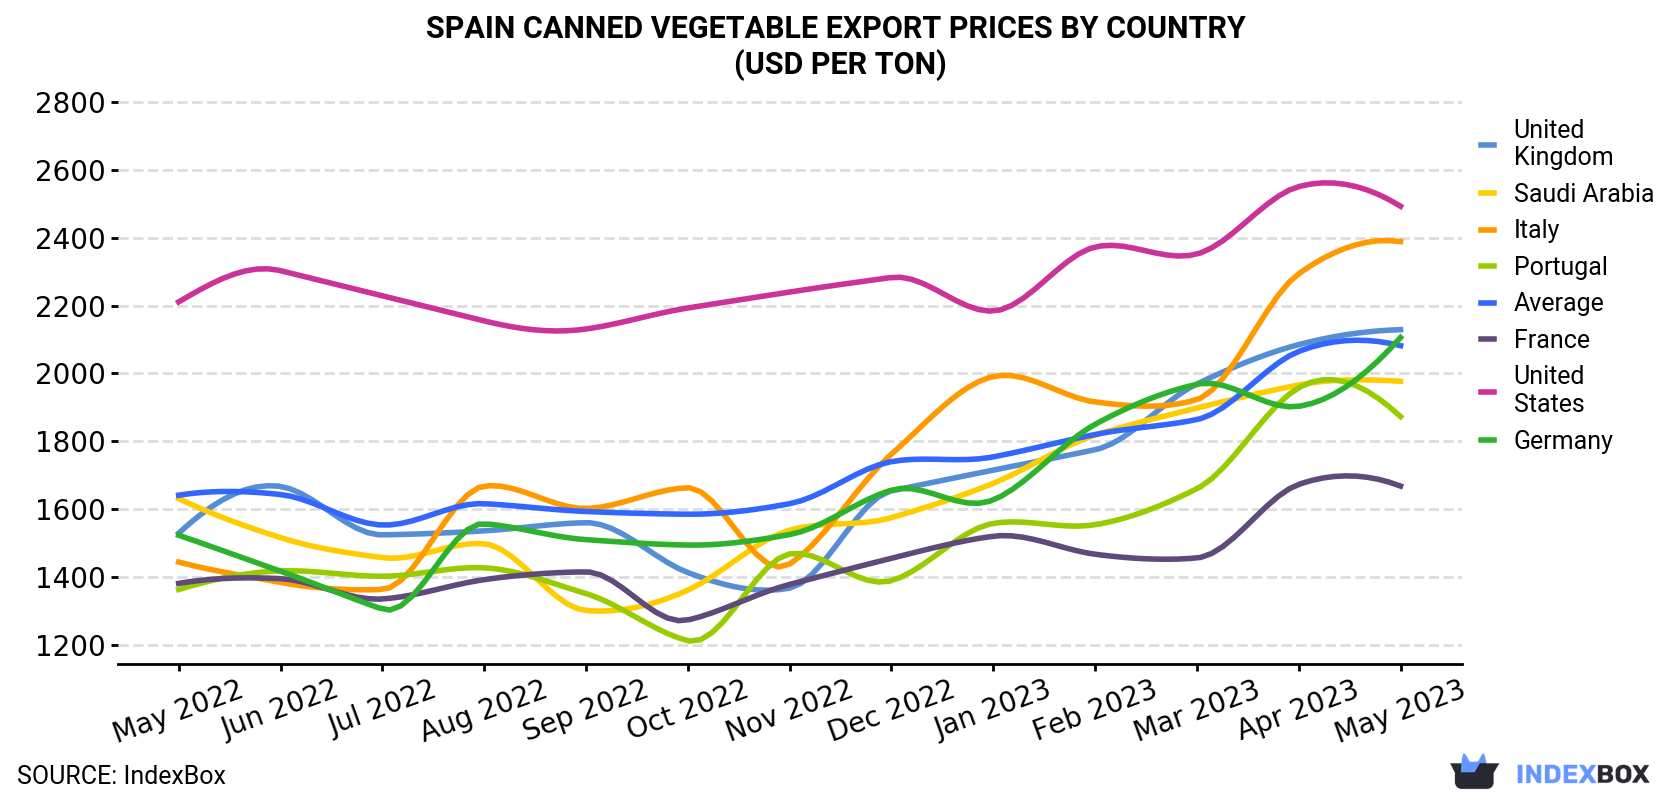 Spain Canned Vegetable Export Prices By Country (USD Per Ton)